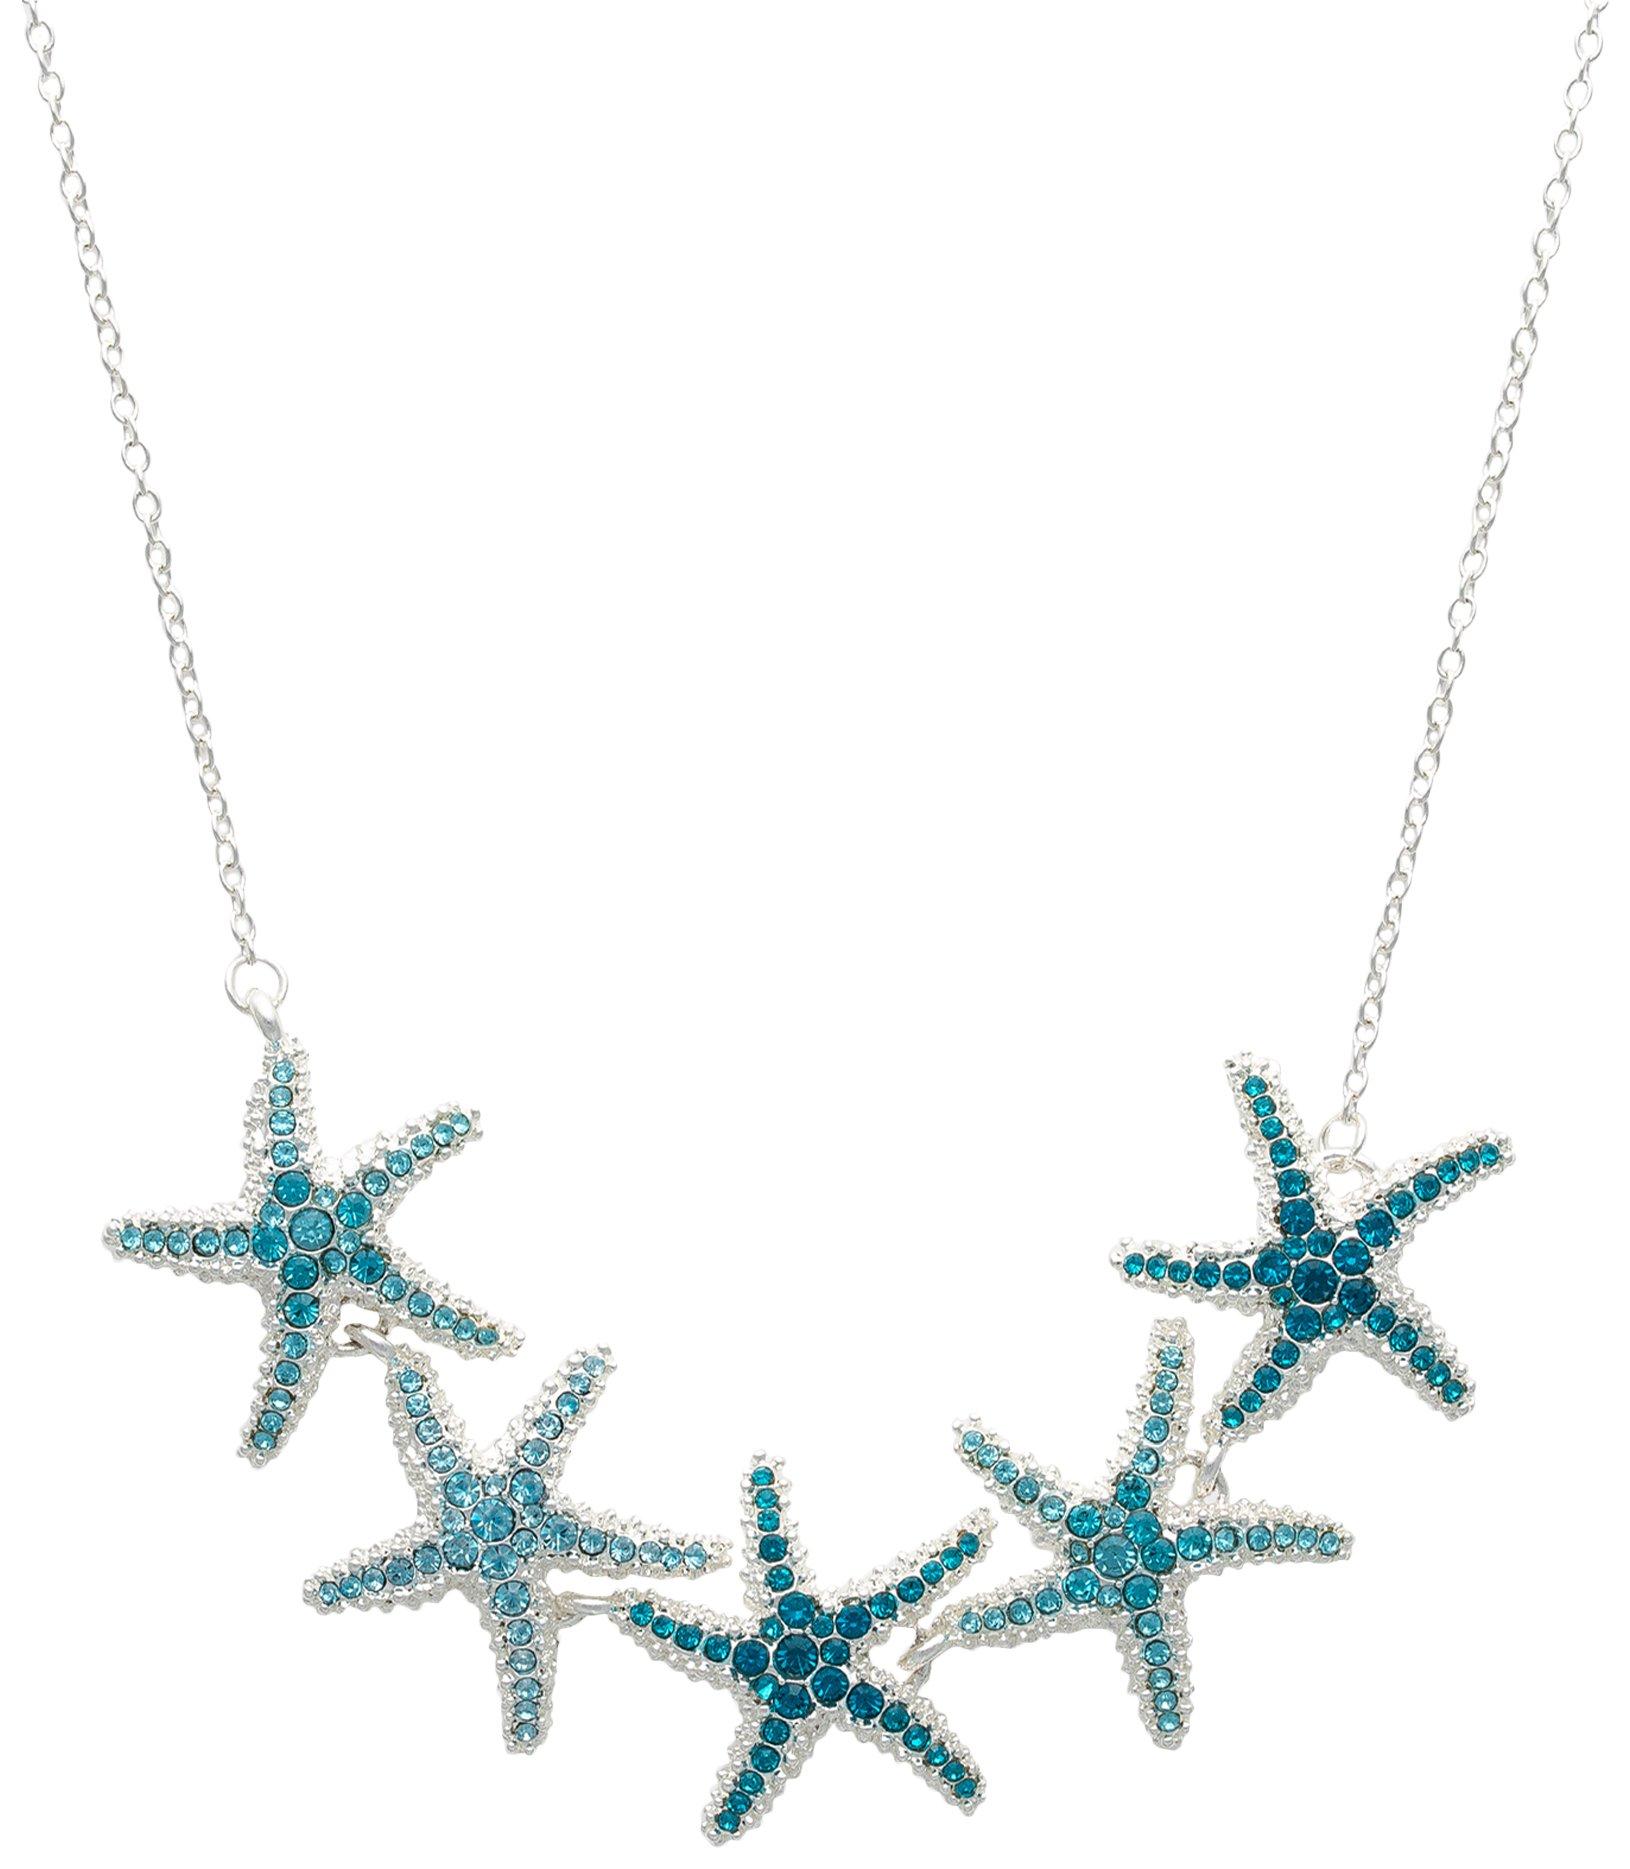 Beach Chic Pave Starfish Silver Tone Frontal Necklace